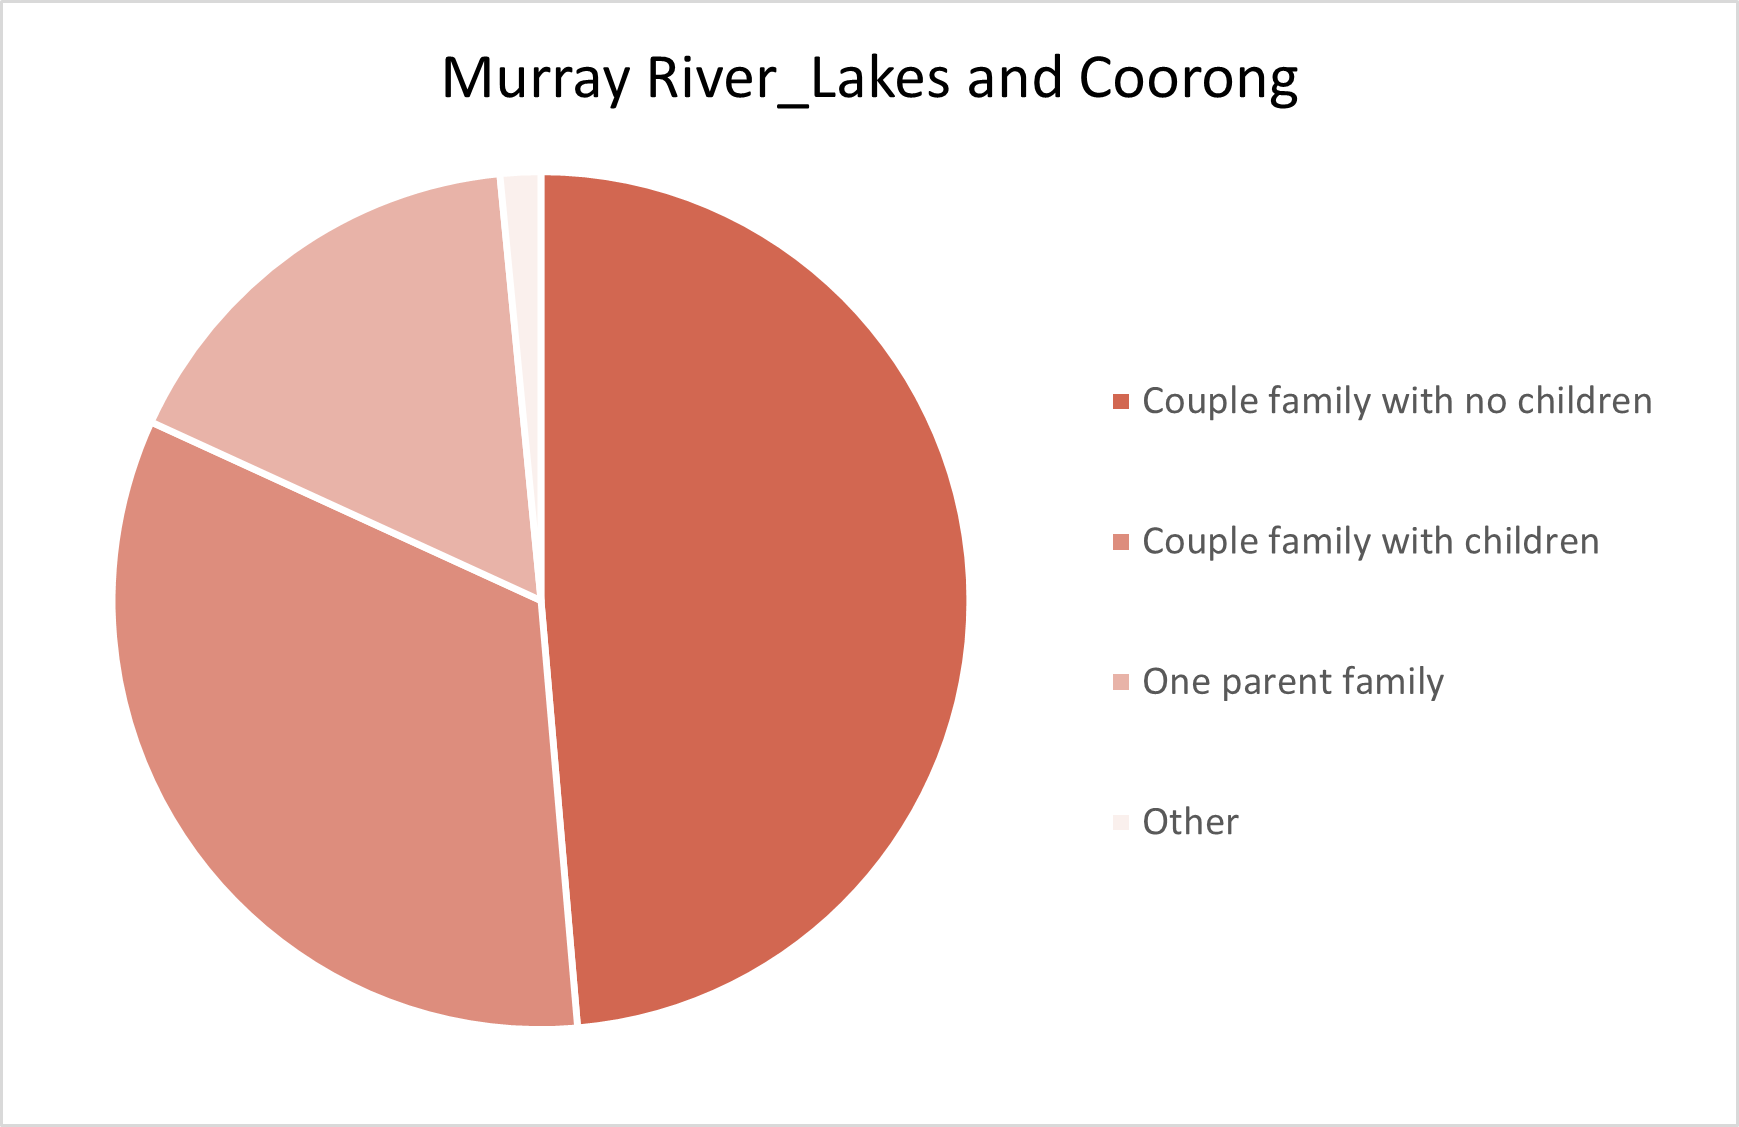 Murray River, Lakes and Coorong Adelaide Hills Population Statistics